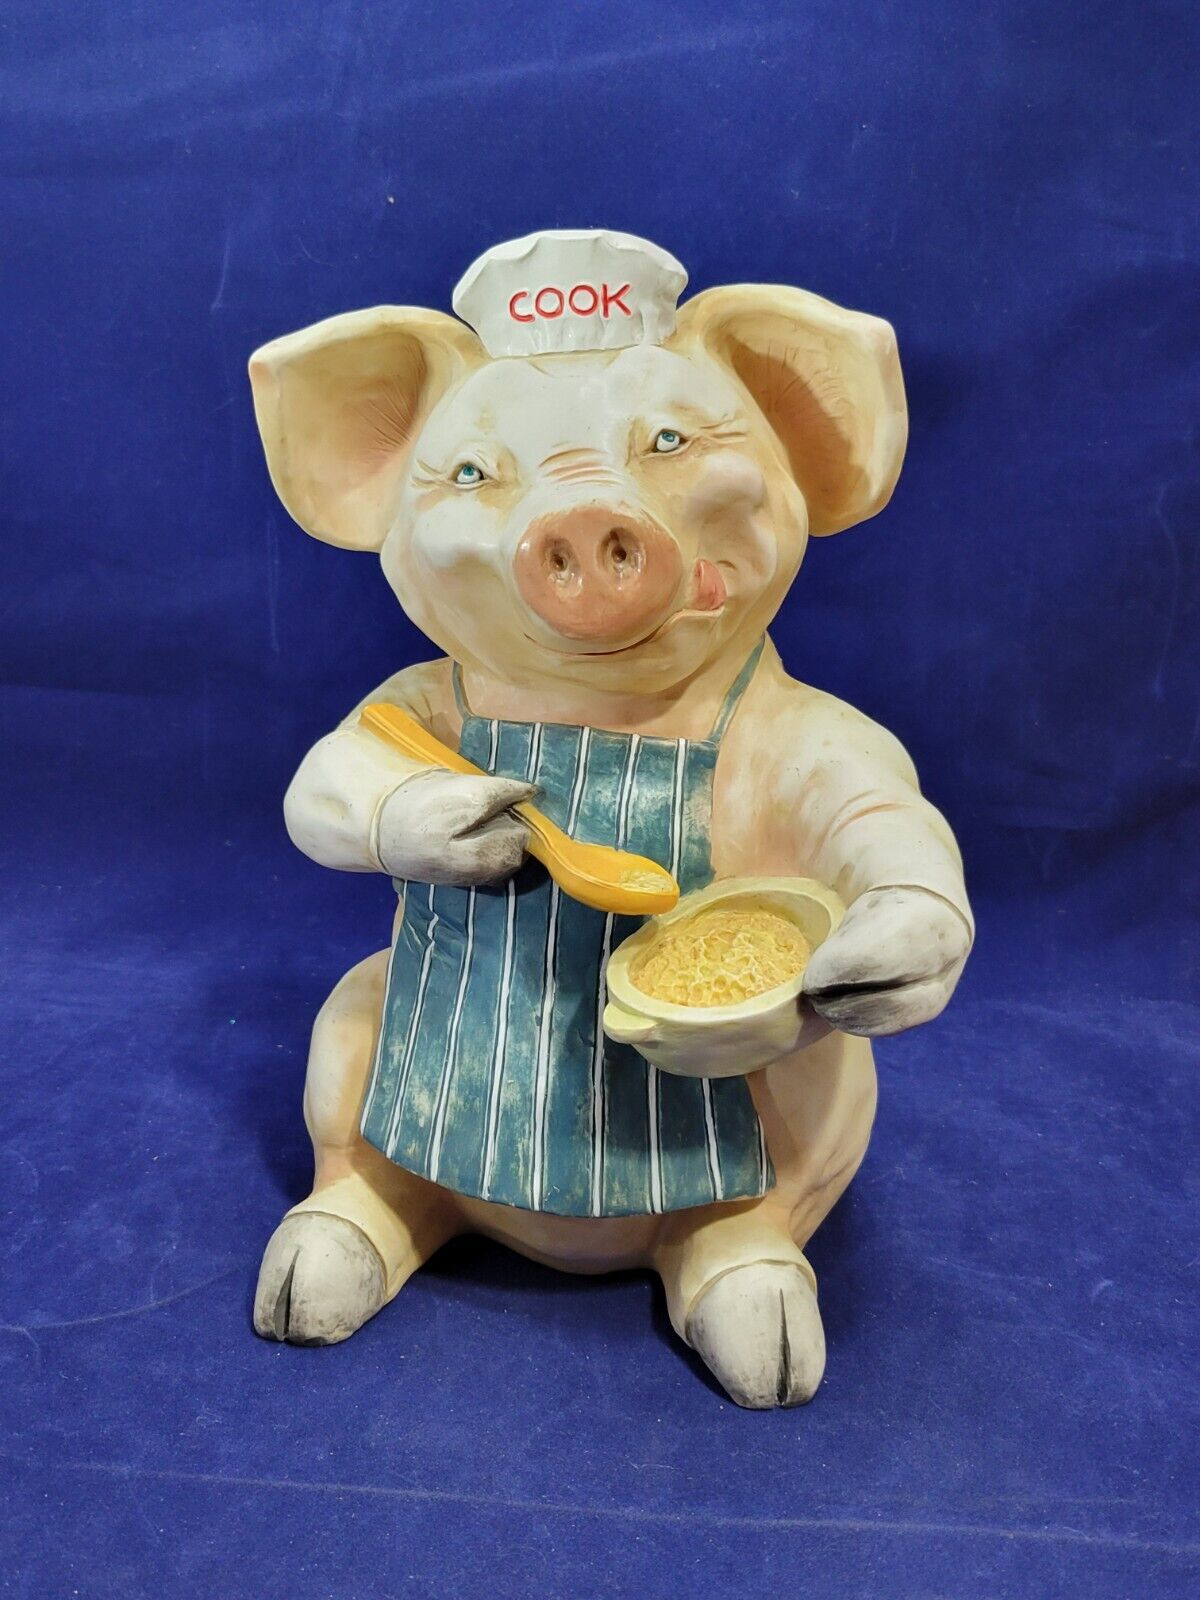 Vintage Pig Statue Collectible Cook ~ Jenny Chapman, 1996, Ceramic /Pottery 